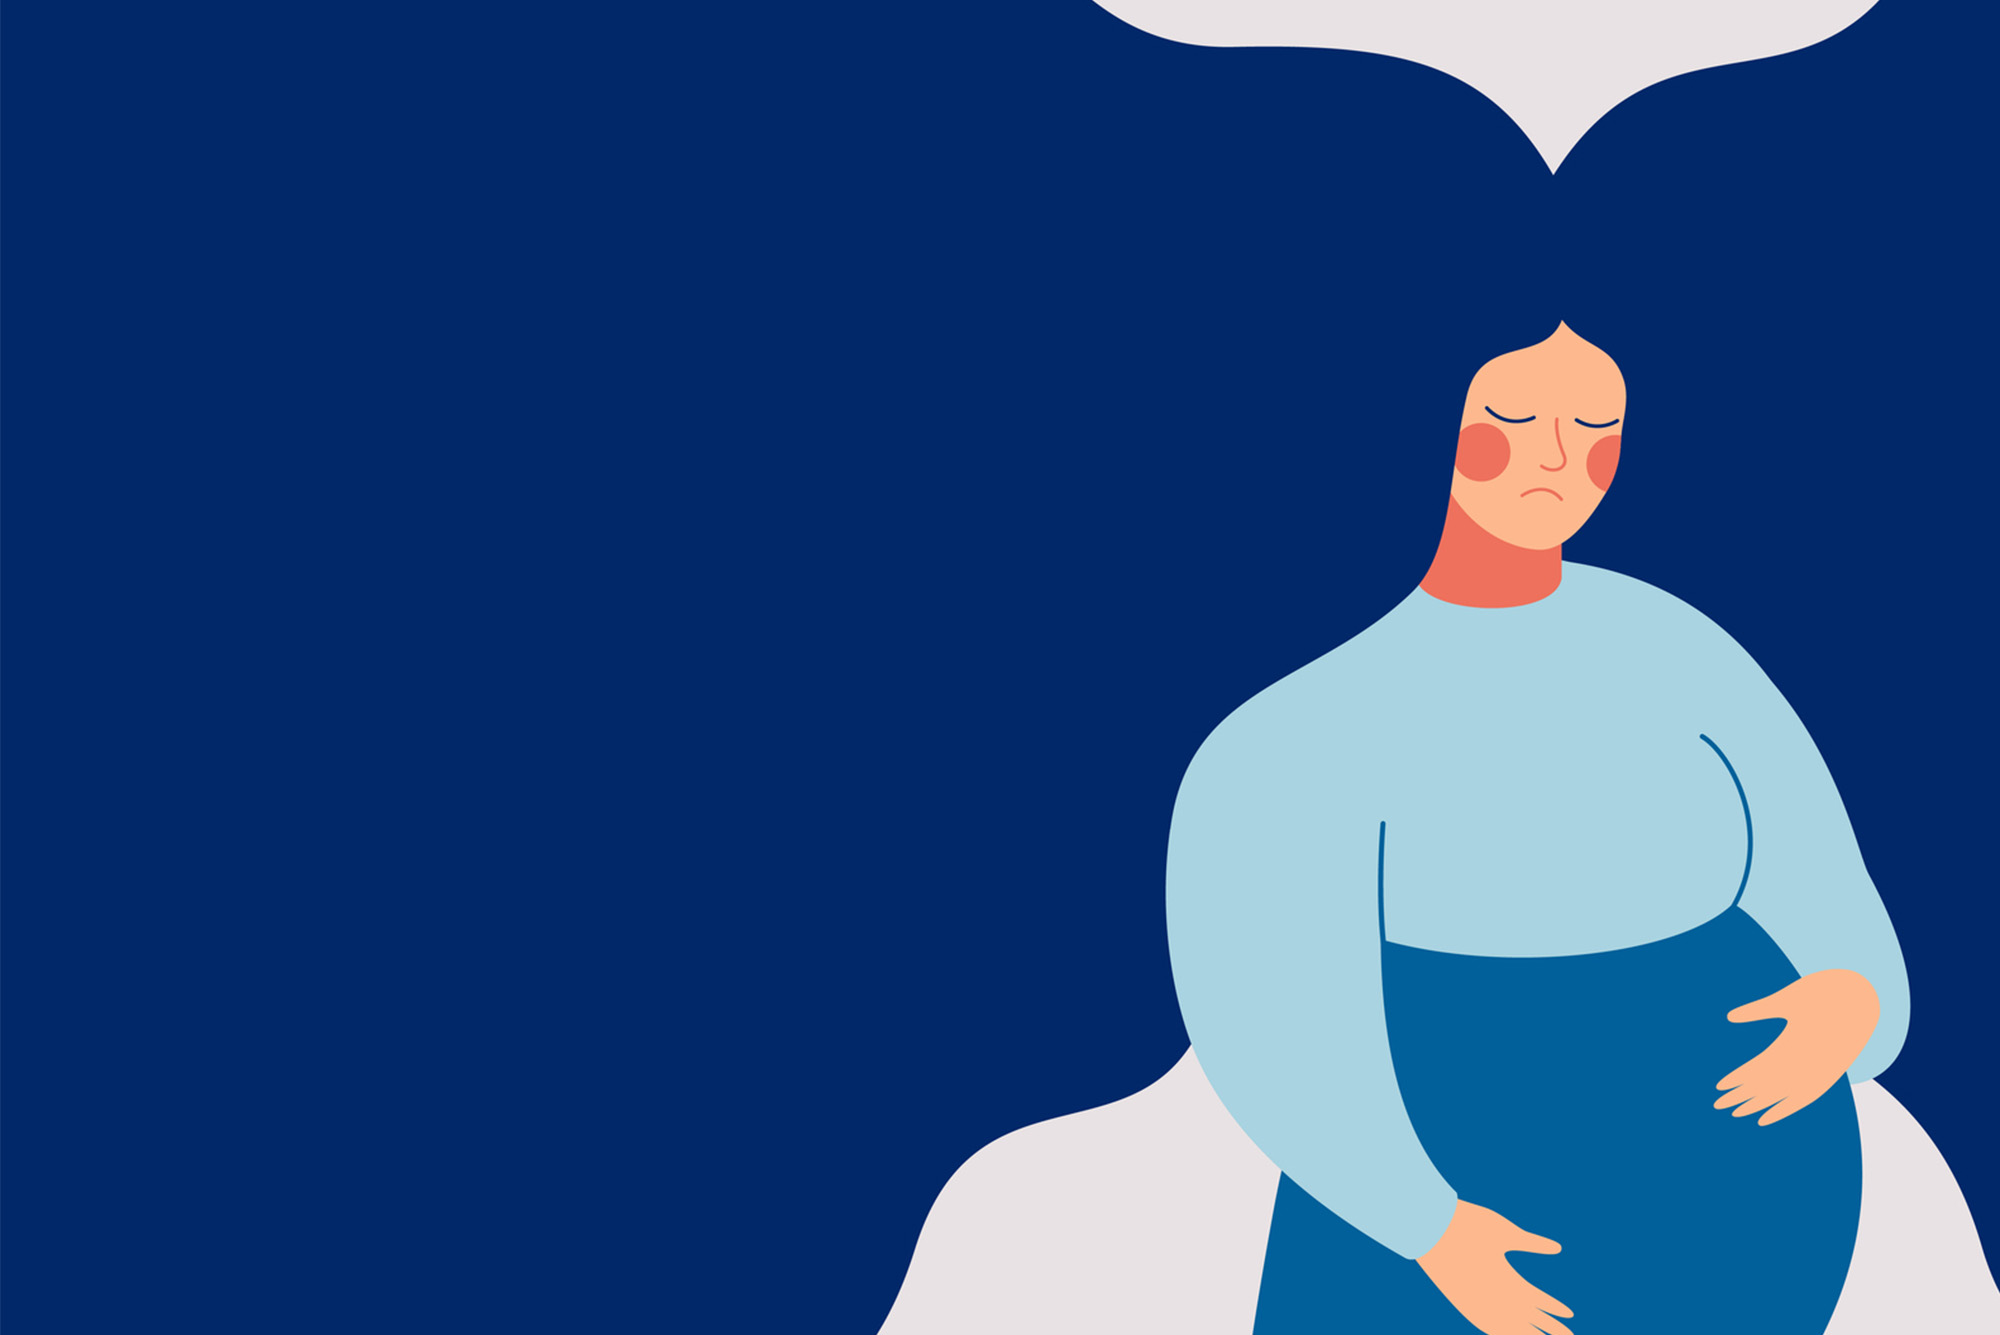 Illustration of a sad pregnant women with long blue hair